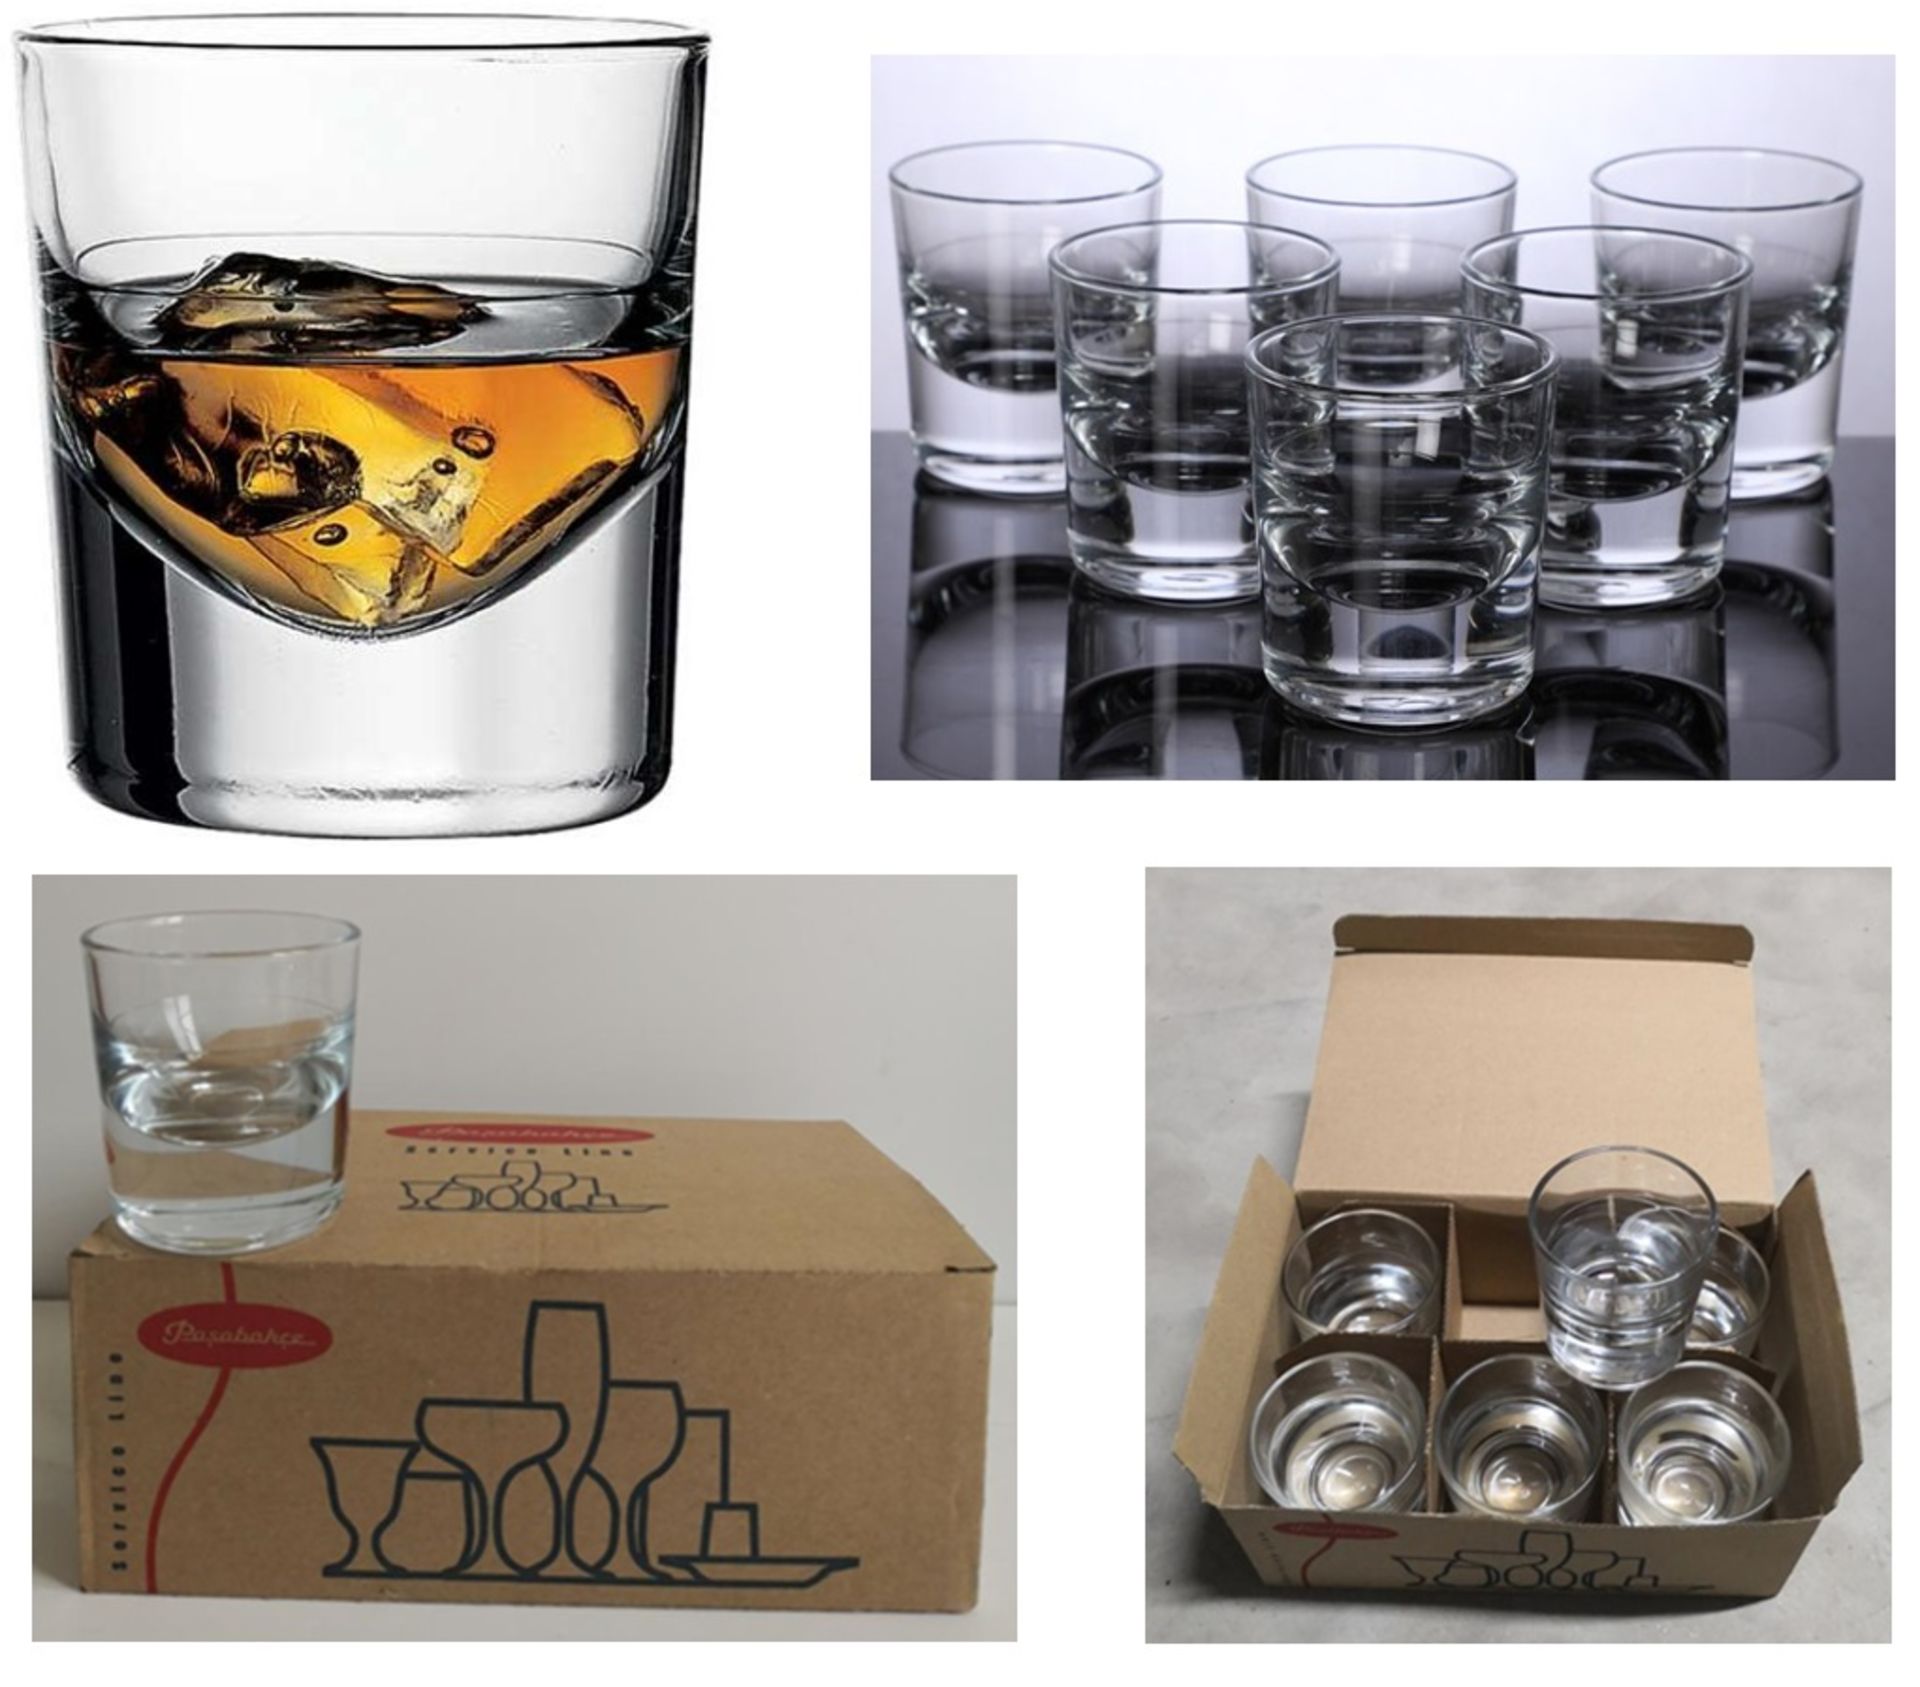 100 x Brand New Sets of Whiskey Glasses by Pasabache | 6 pcs per box | Total RRP £2000